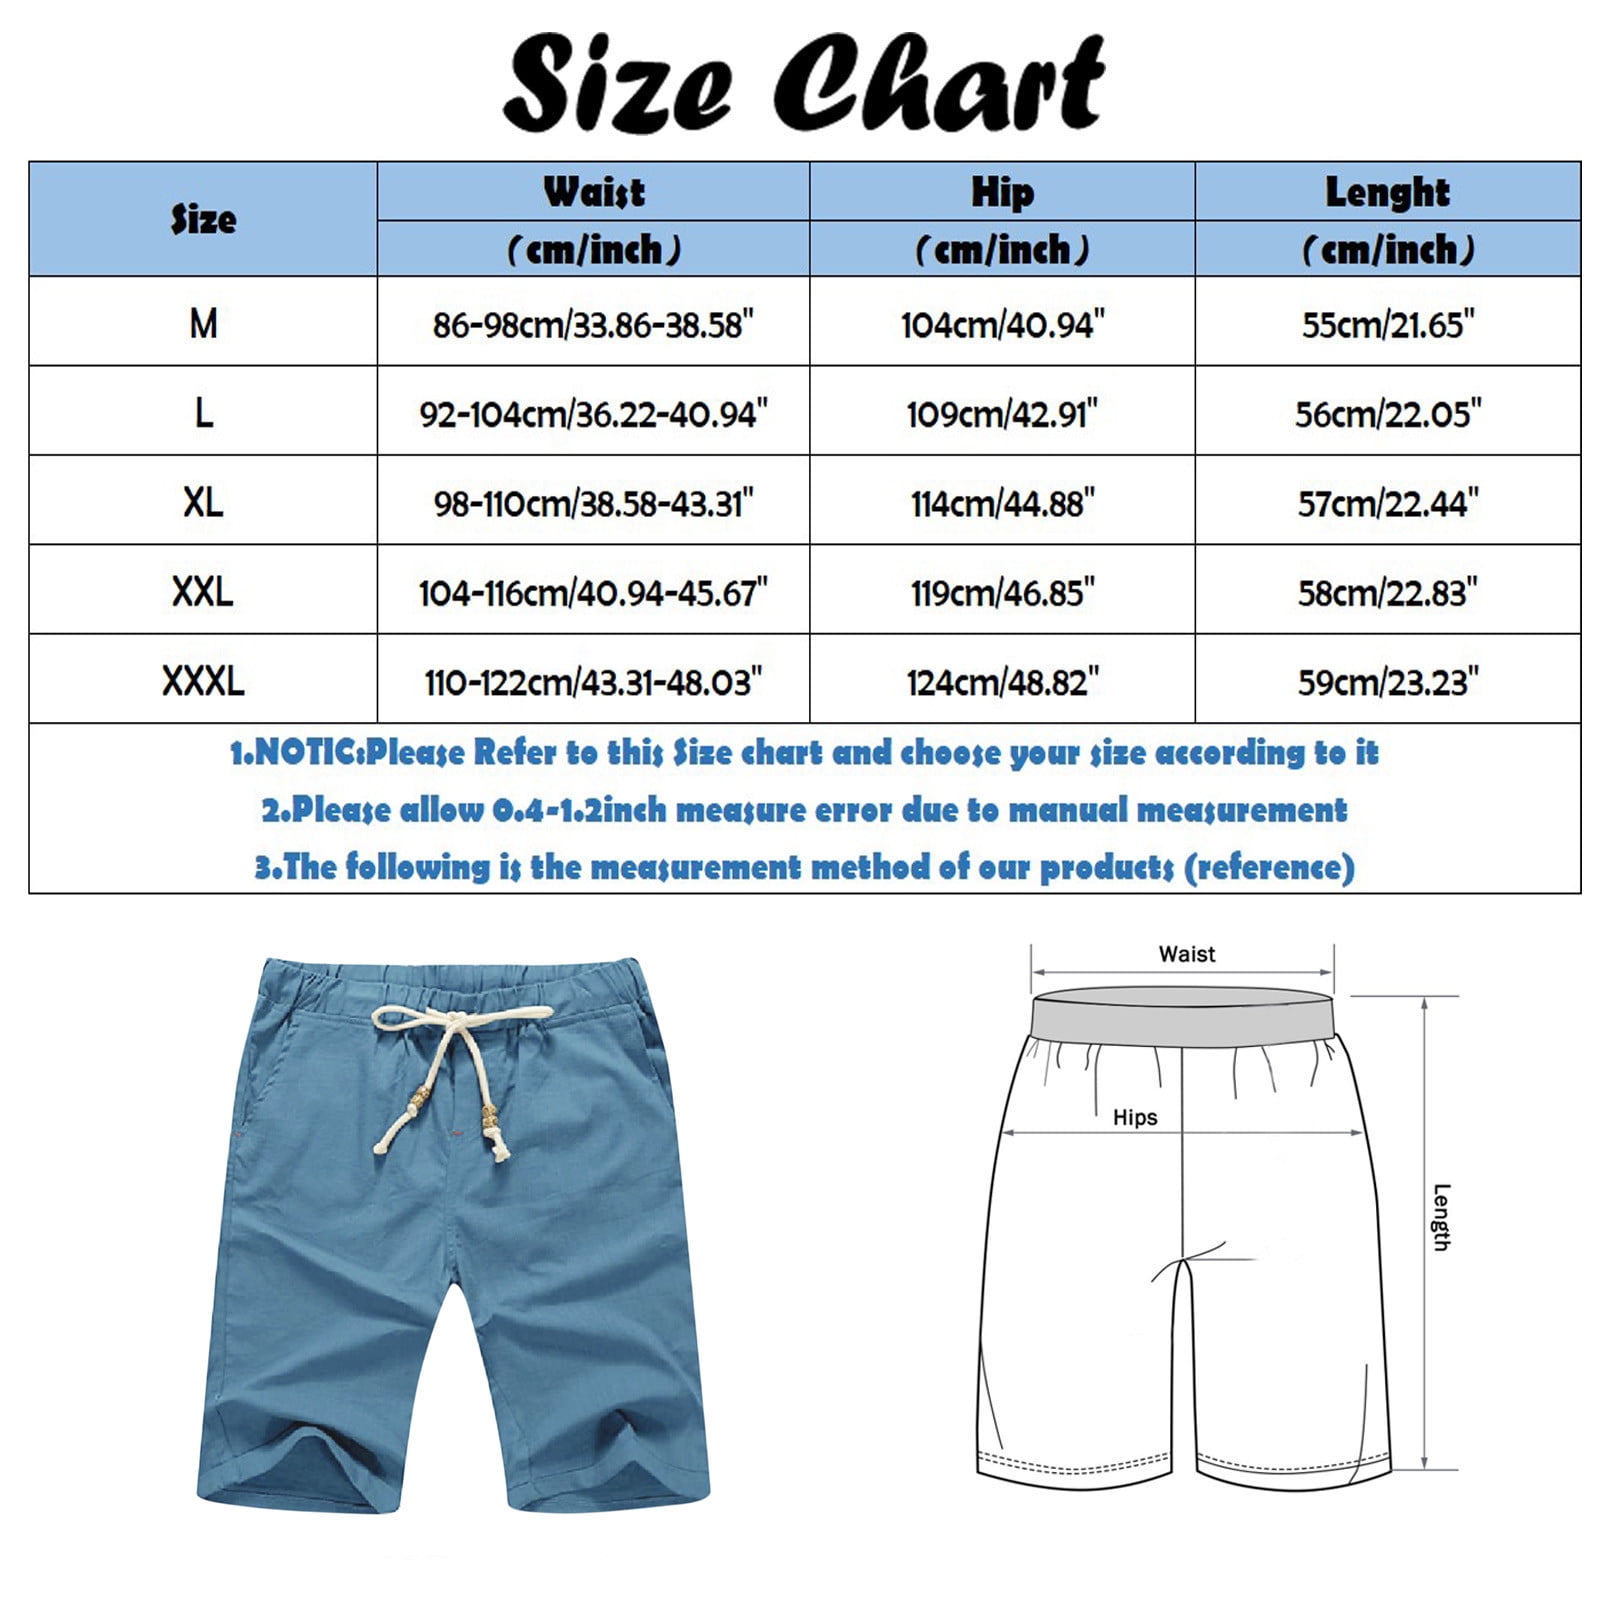 adviicd Men Pants Casual Slim Mens Shorts Casual Cargo Shorts for Men -  Casual and Cotton Inseam Shorts Navy 3XL 